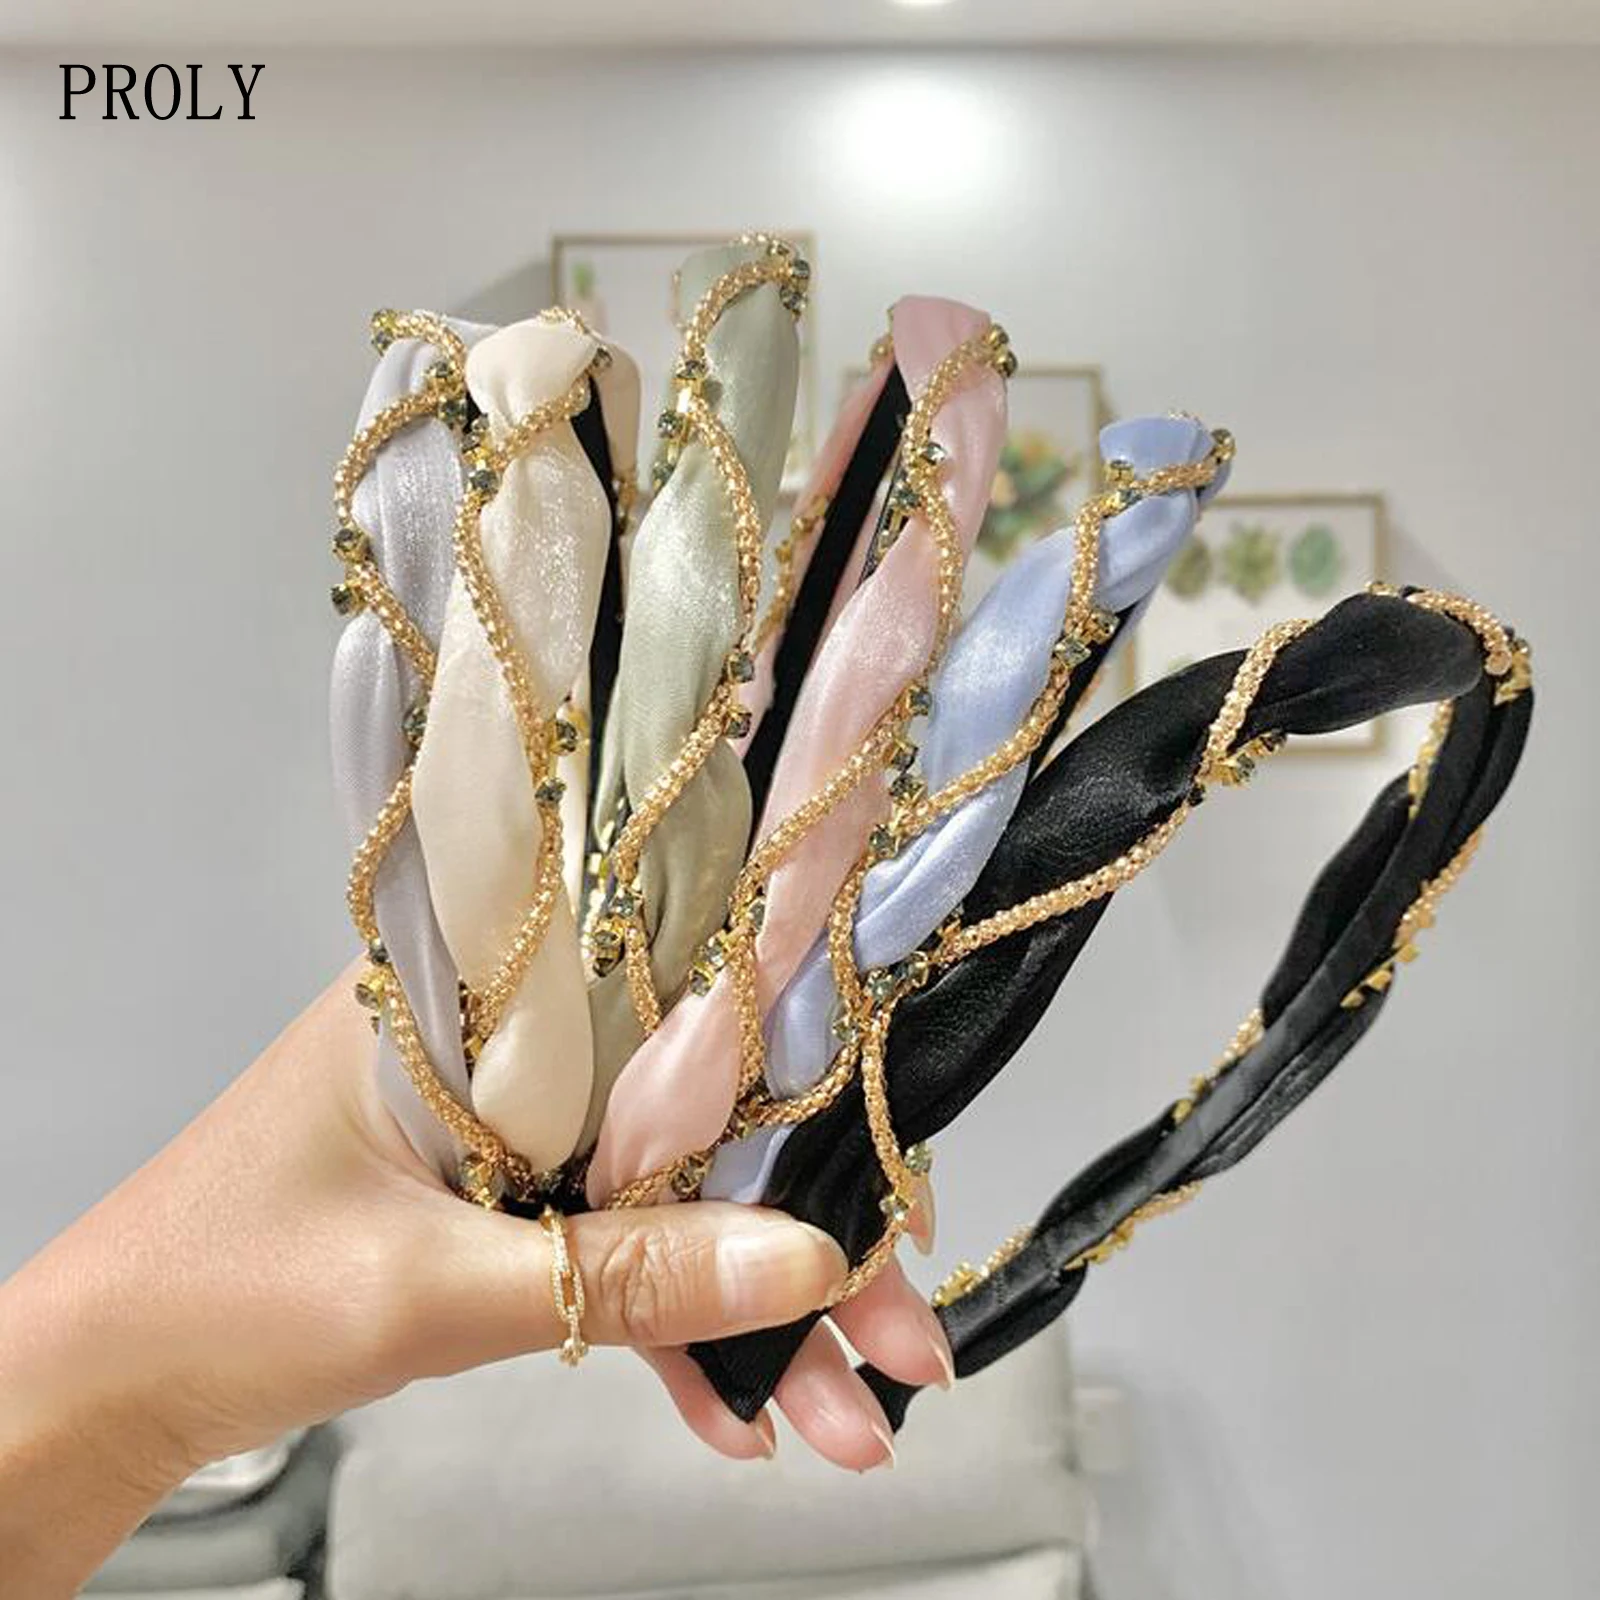 

PROLY New Fashion Women Headband Shining Rhinestone Entangled Narrow-sided Hairband Solid Color Exquisite Hair Accessories